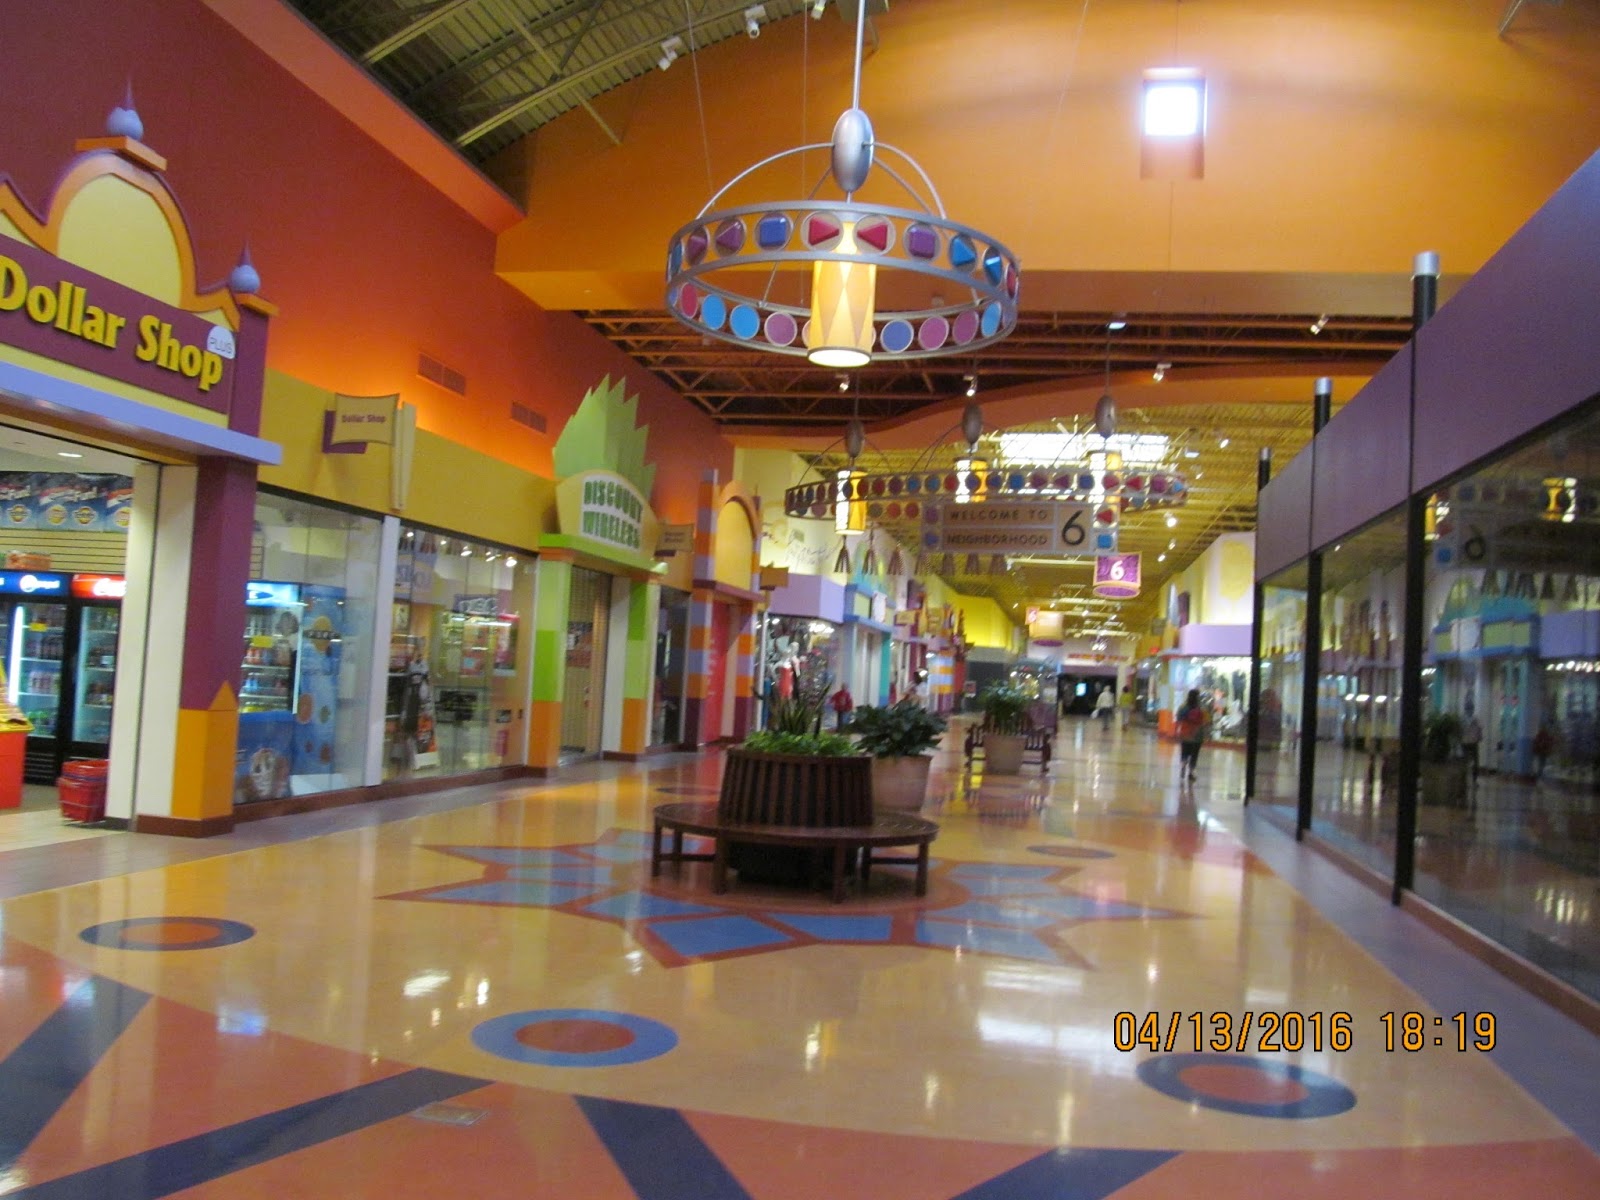 Trip to the Mall: St. Louis Outlet Mall [( St. Louis Mills)- Revisited]- Hazelwood, Missouri